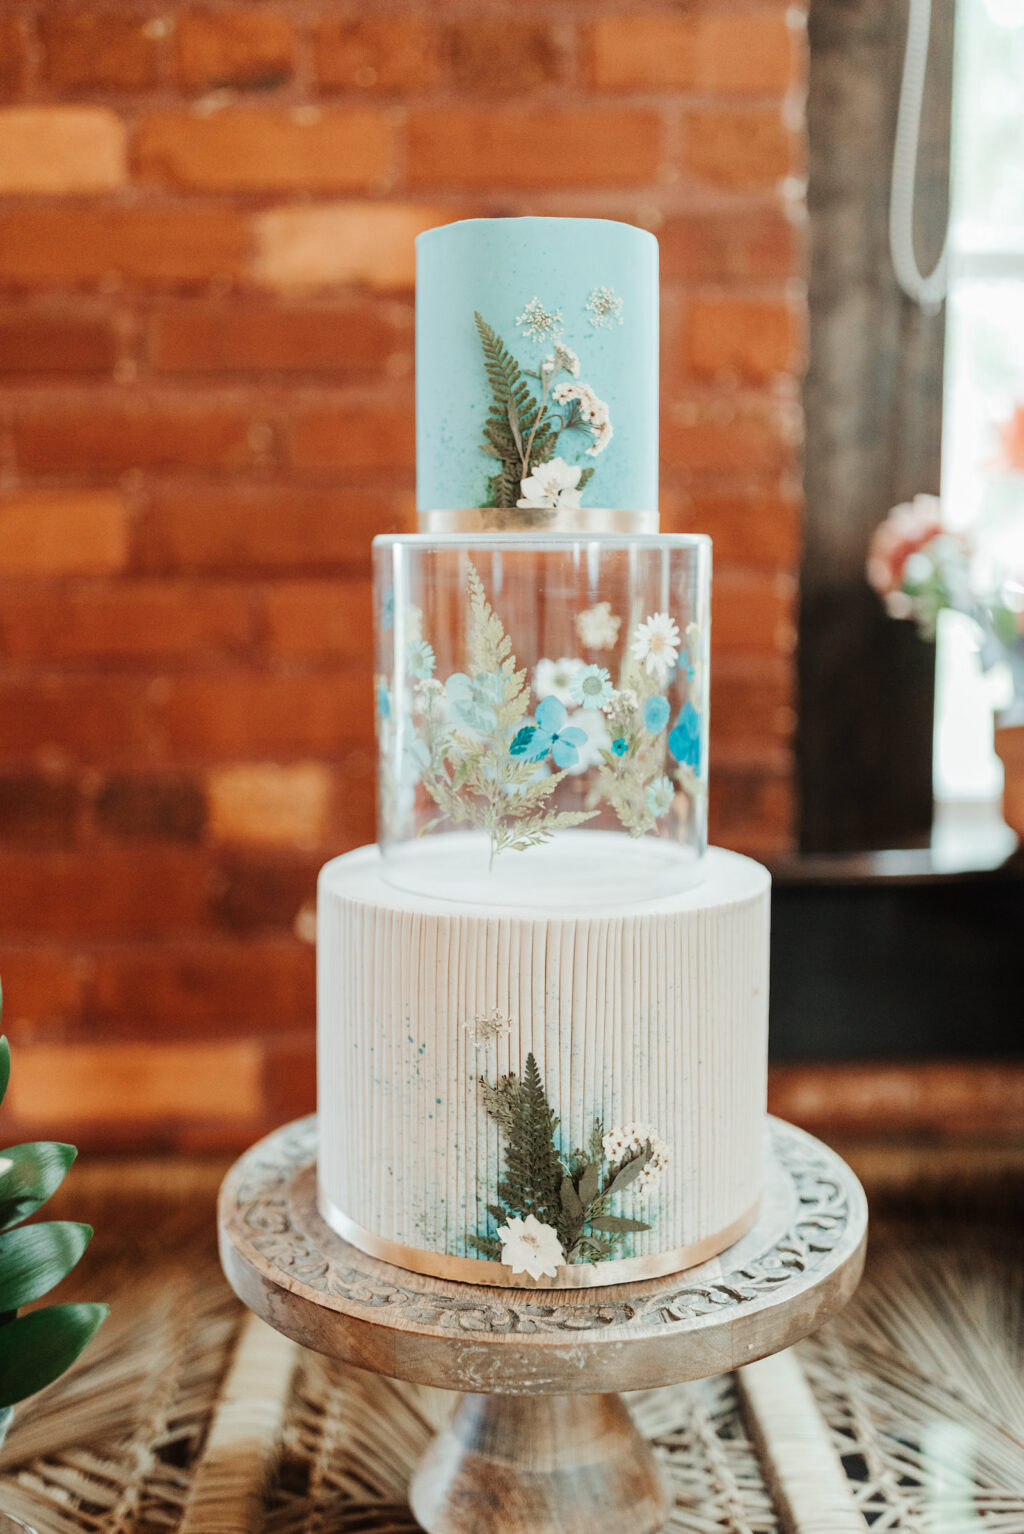 Boho Industrial Wedding Cake Table with Three Tier Cake in White, Blue, and Acrylic | Tampa Wedding Baker The Artistic Whisk